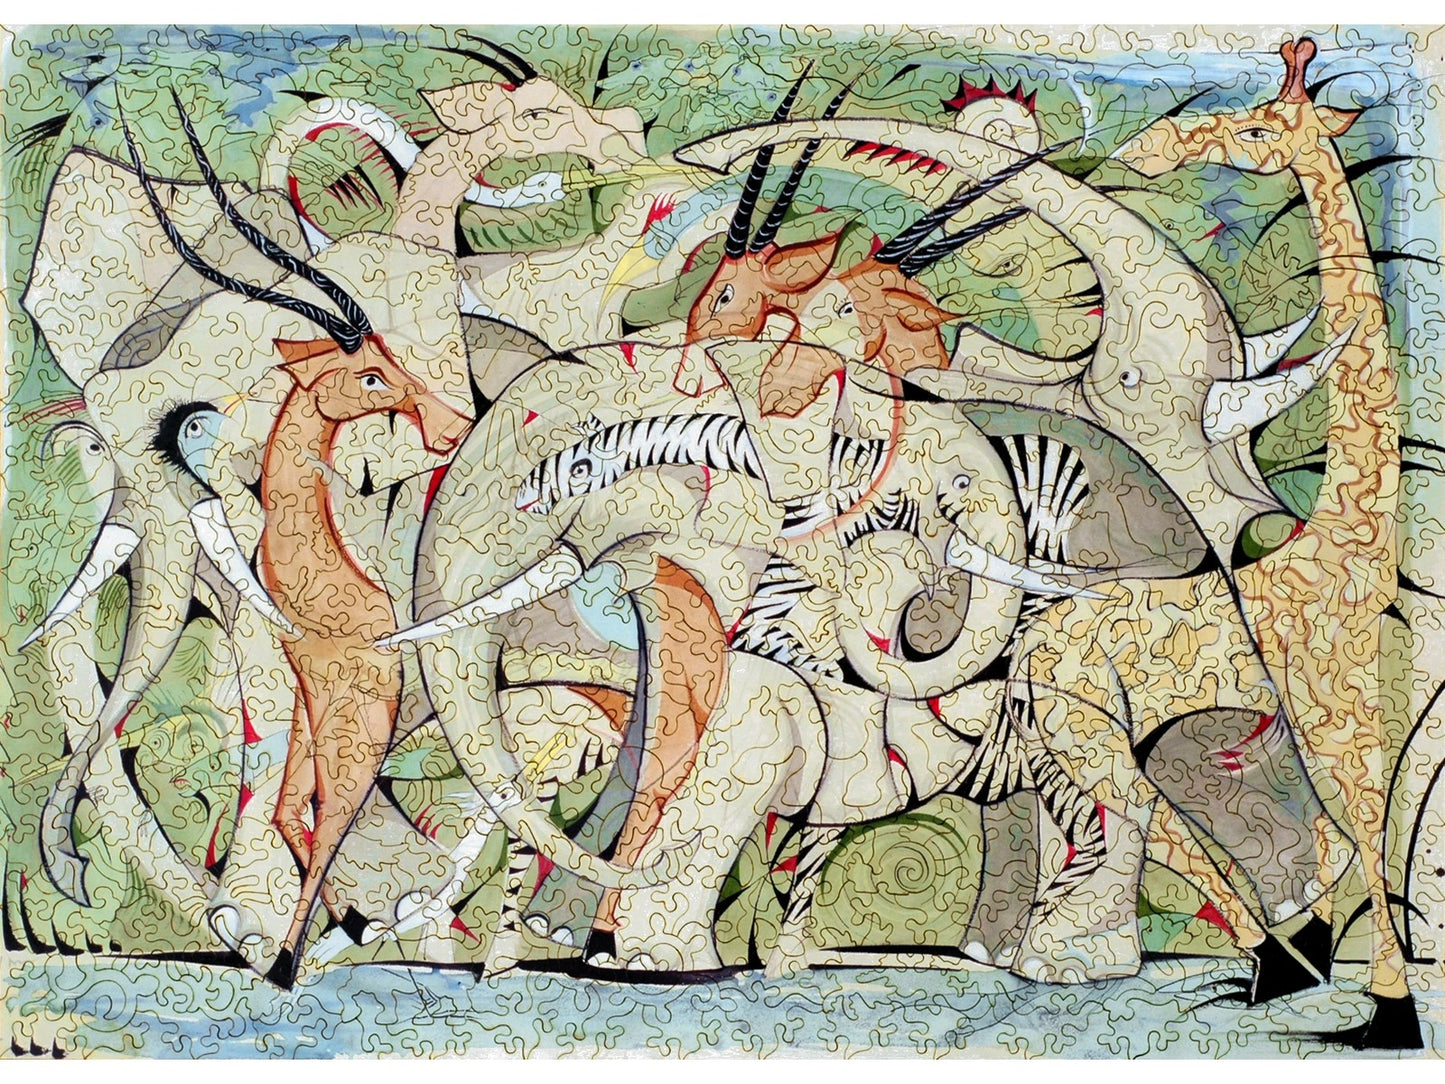 The front of the puzzle, On the Ngare Ndare River, which shows an abstract depiction of overlapping African animals.